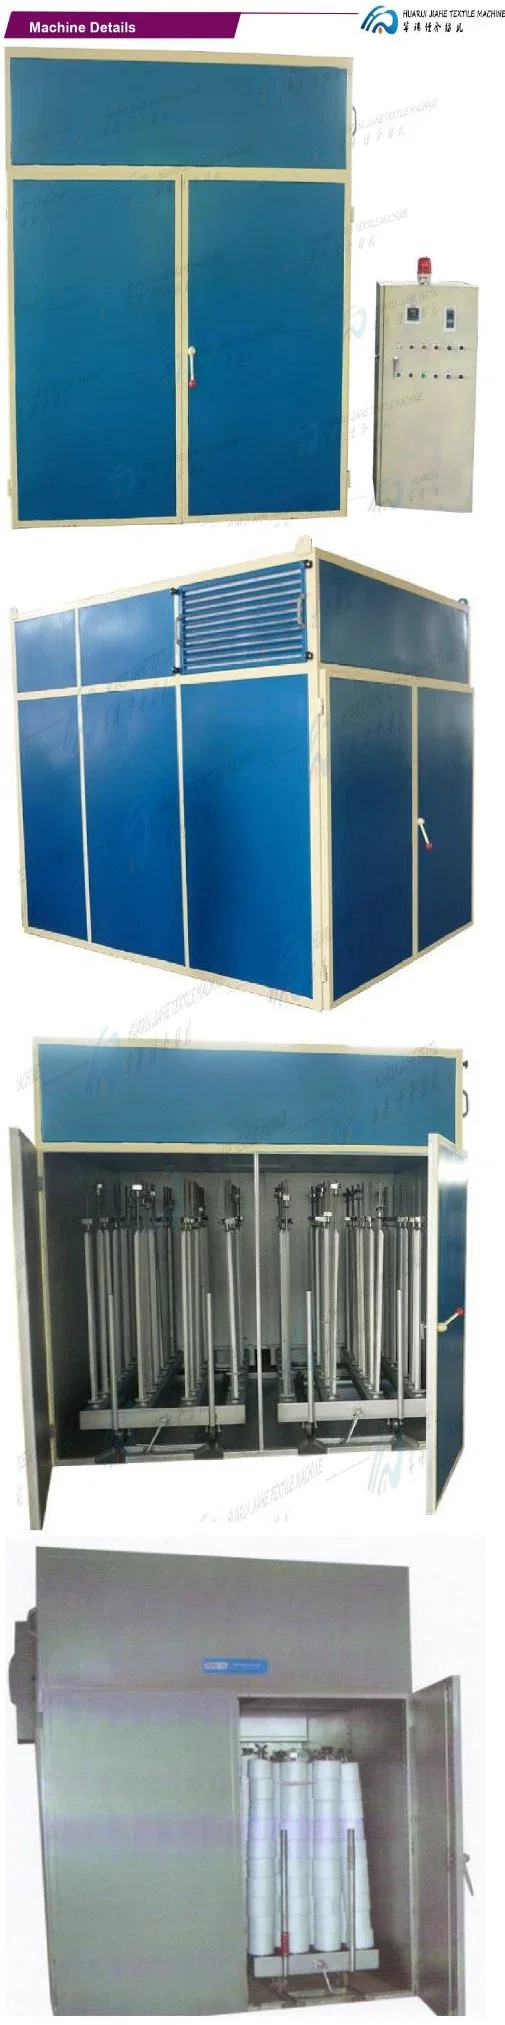 Drying Machine Is Used for Drying of Skein Dyeing, Rinsing, Cotton, Cone Yarn of Chemical Fiber Cone Yarn, Hank Yarn Dual-Purpose Dryer